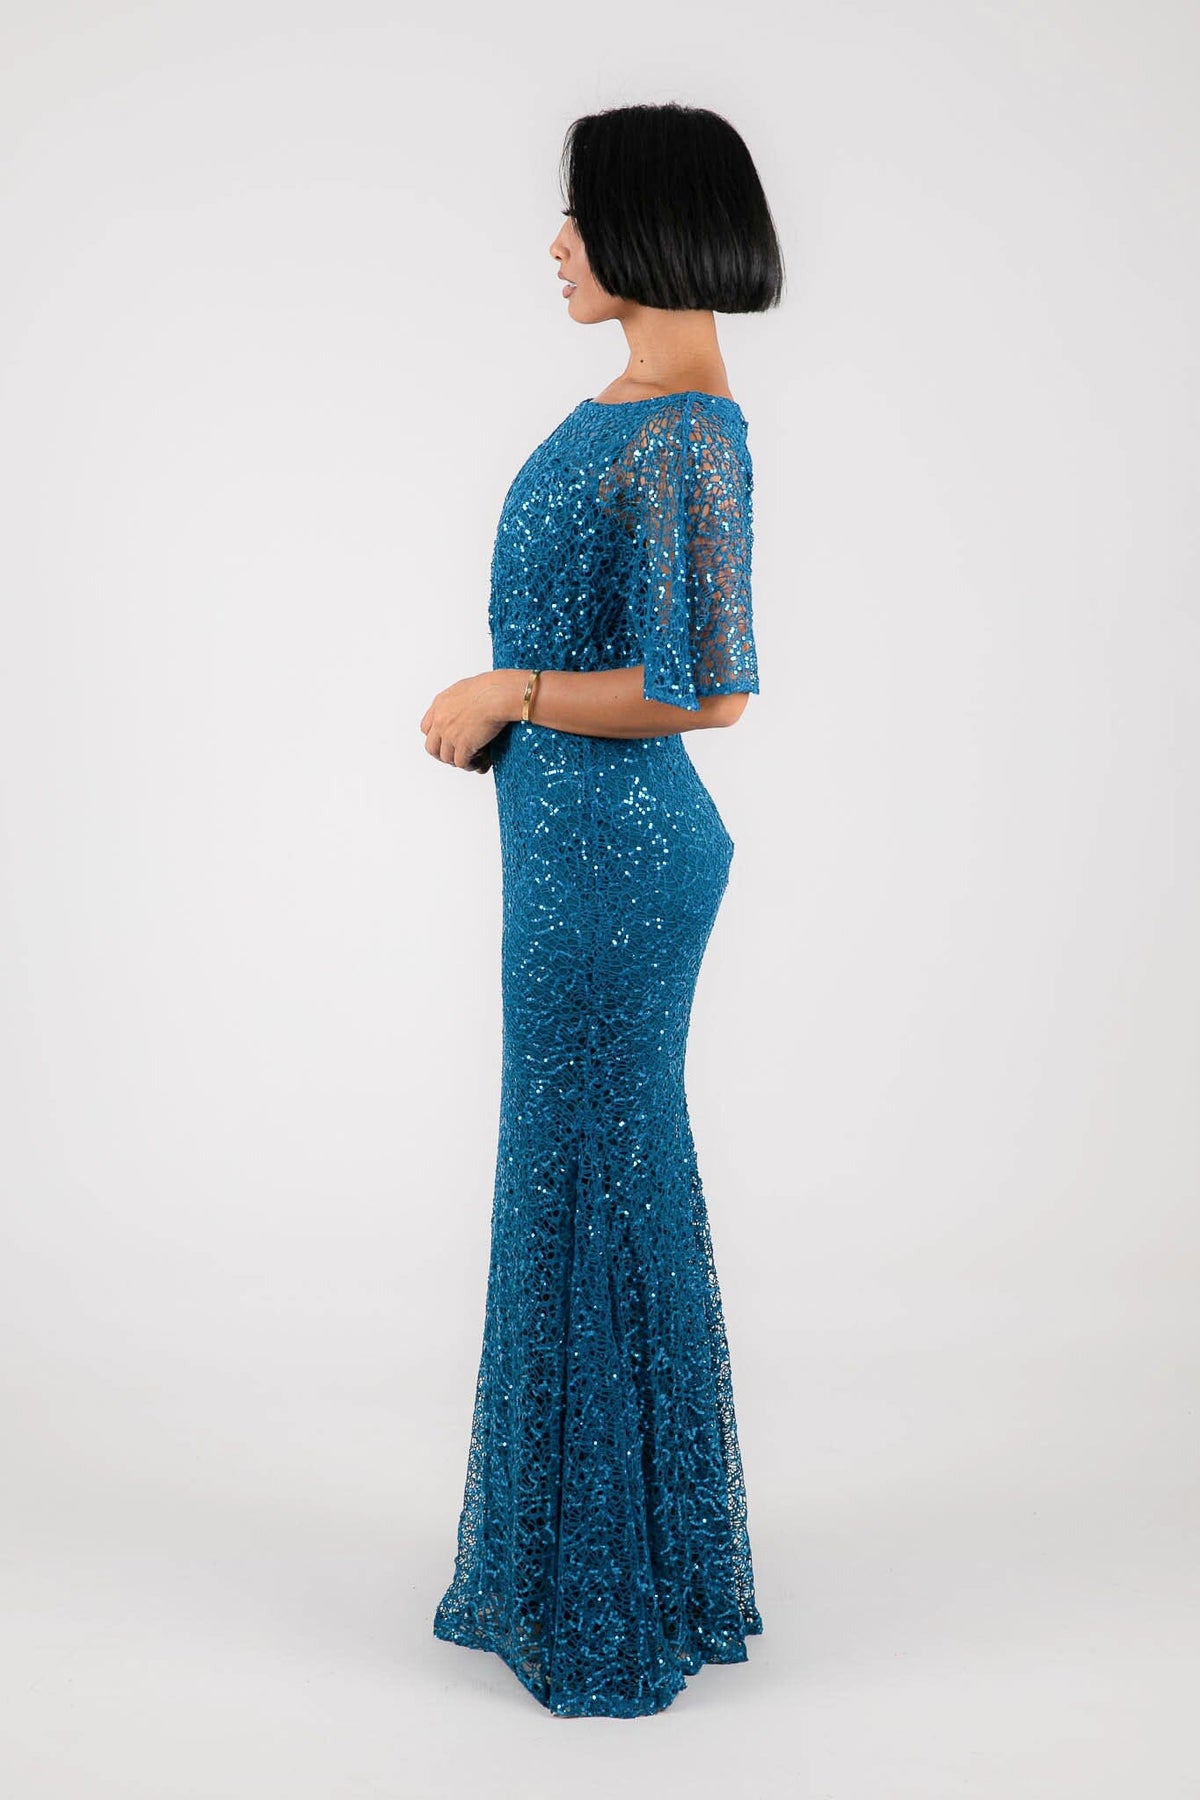 Side Image of Teal blue green sequin evening maxi dress with boat neckline and butterfly sheer half sleeves